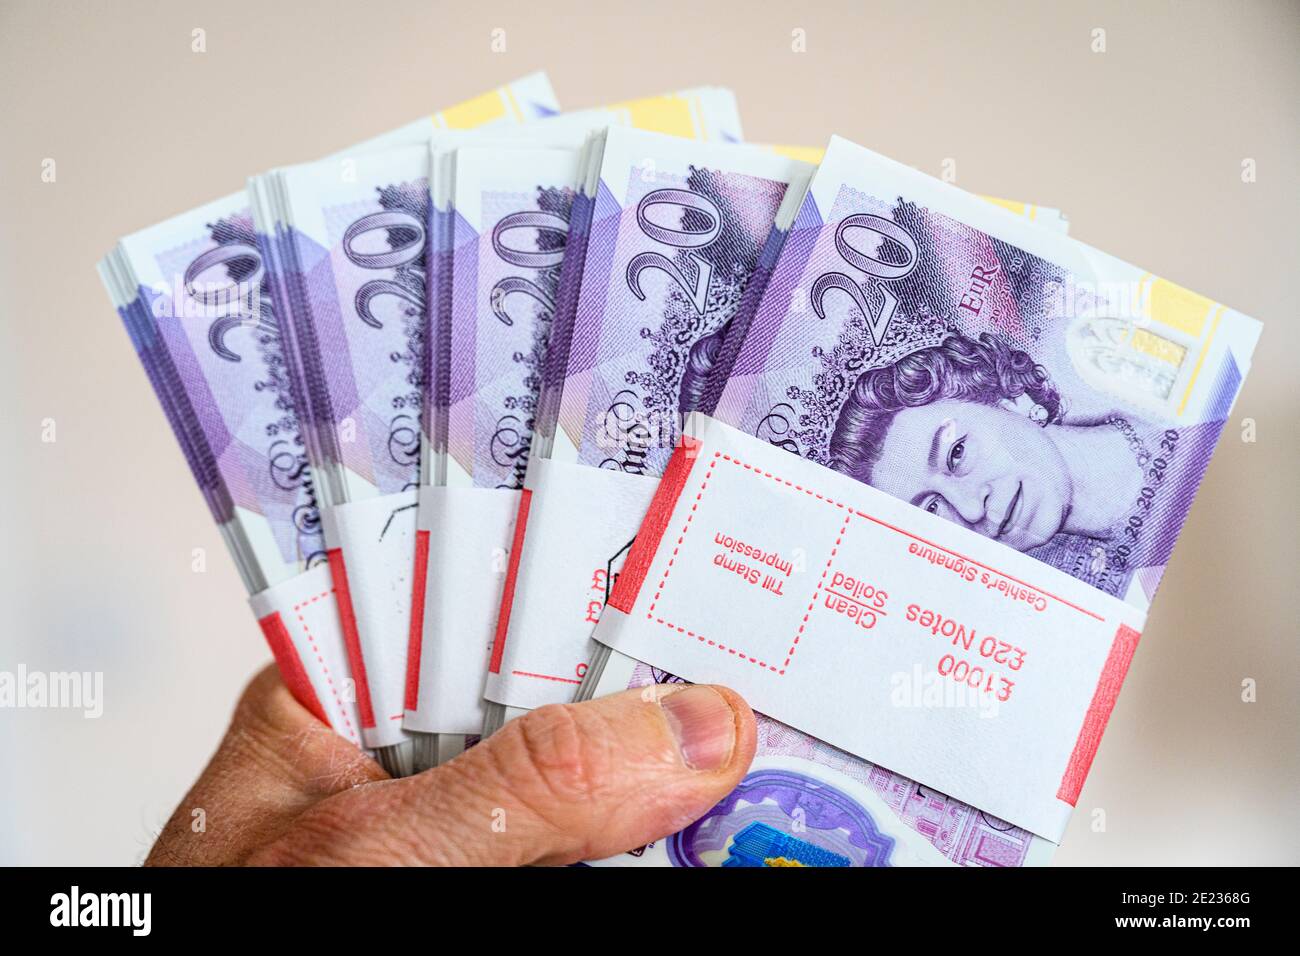 Close up of hand holding £5000 cash in £20 banknotes. British currency. UK pound sterling. Stock Photo